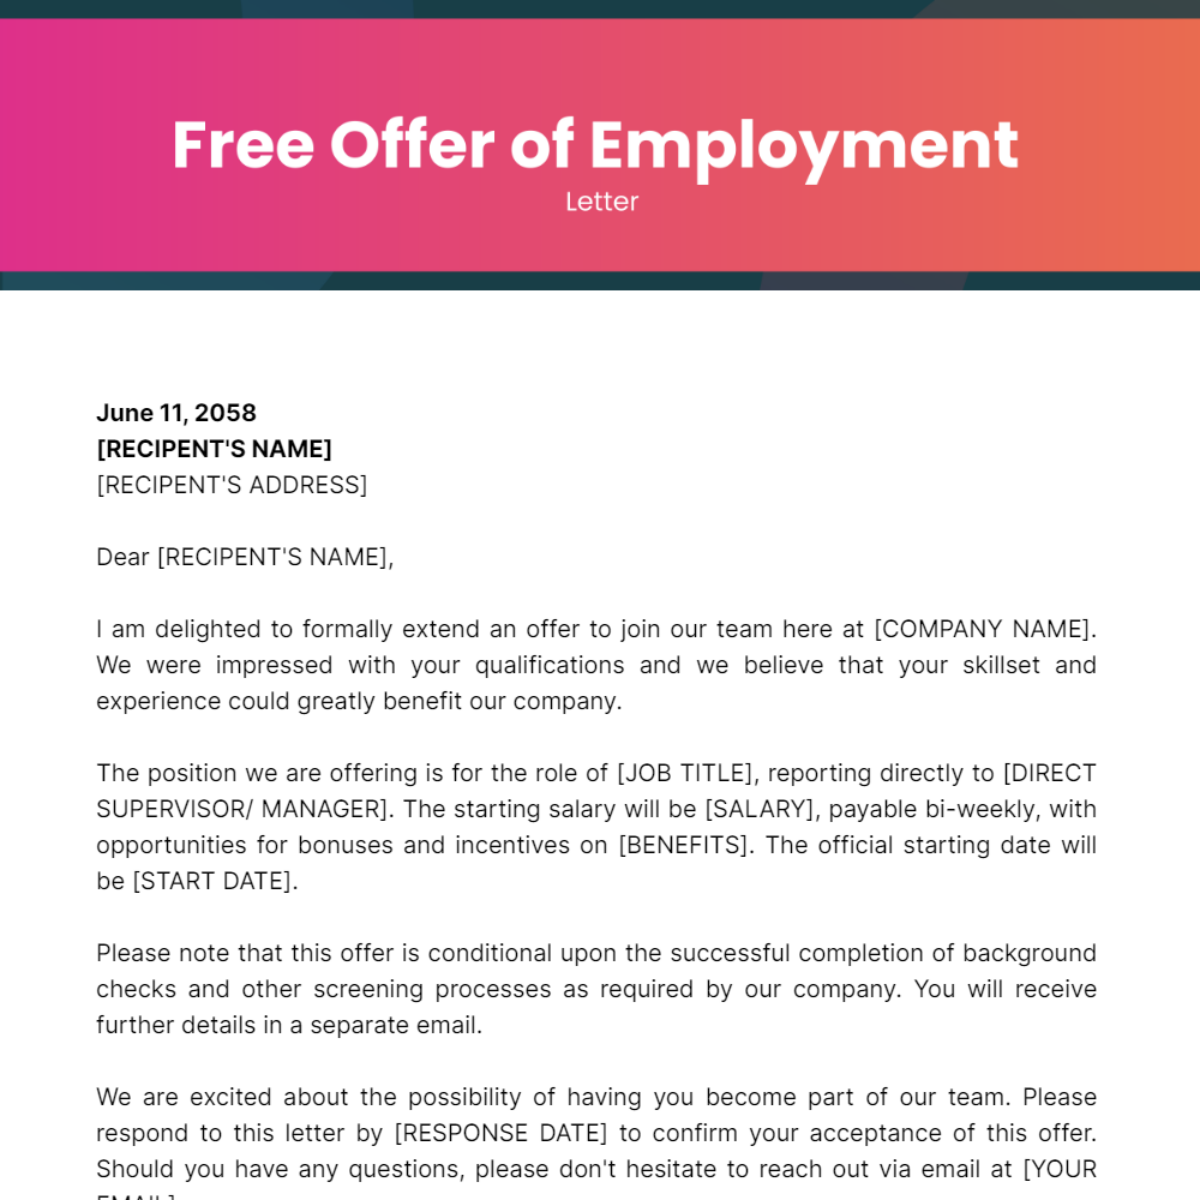 Offer of Employment Letter Template